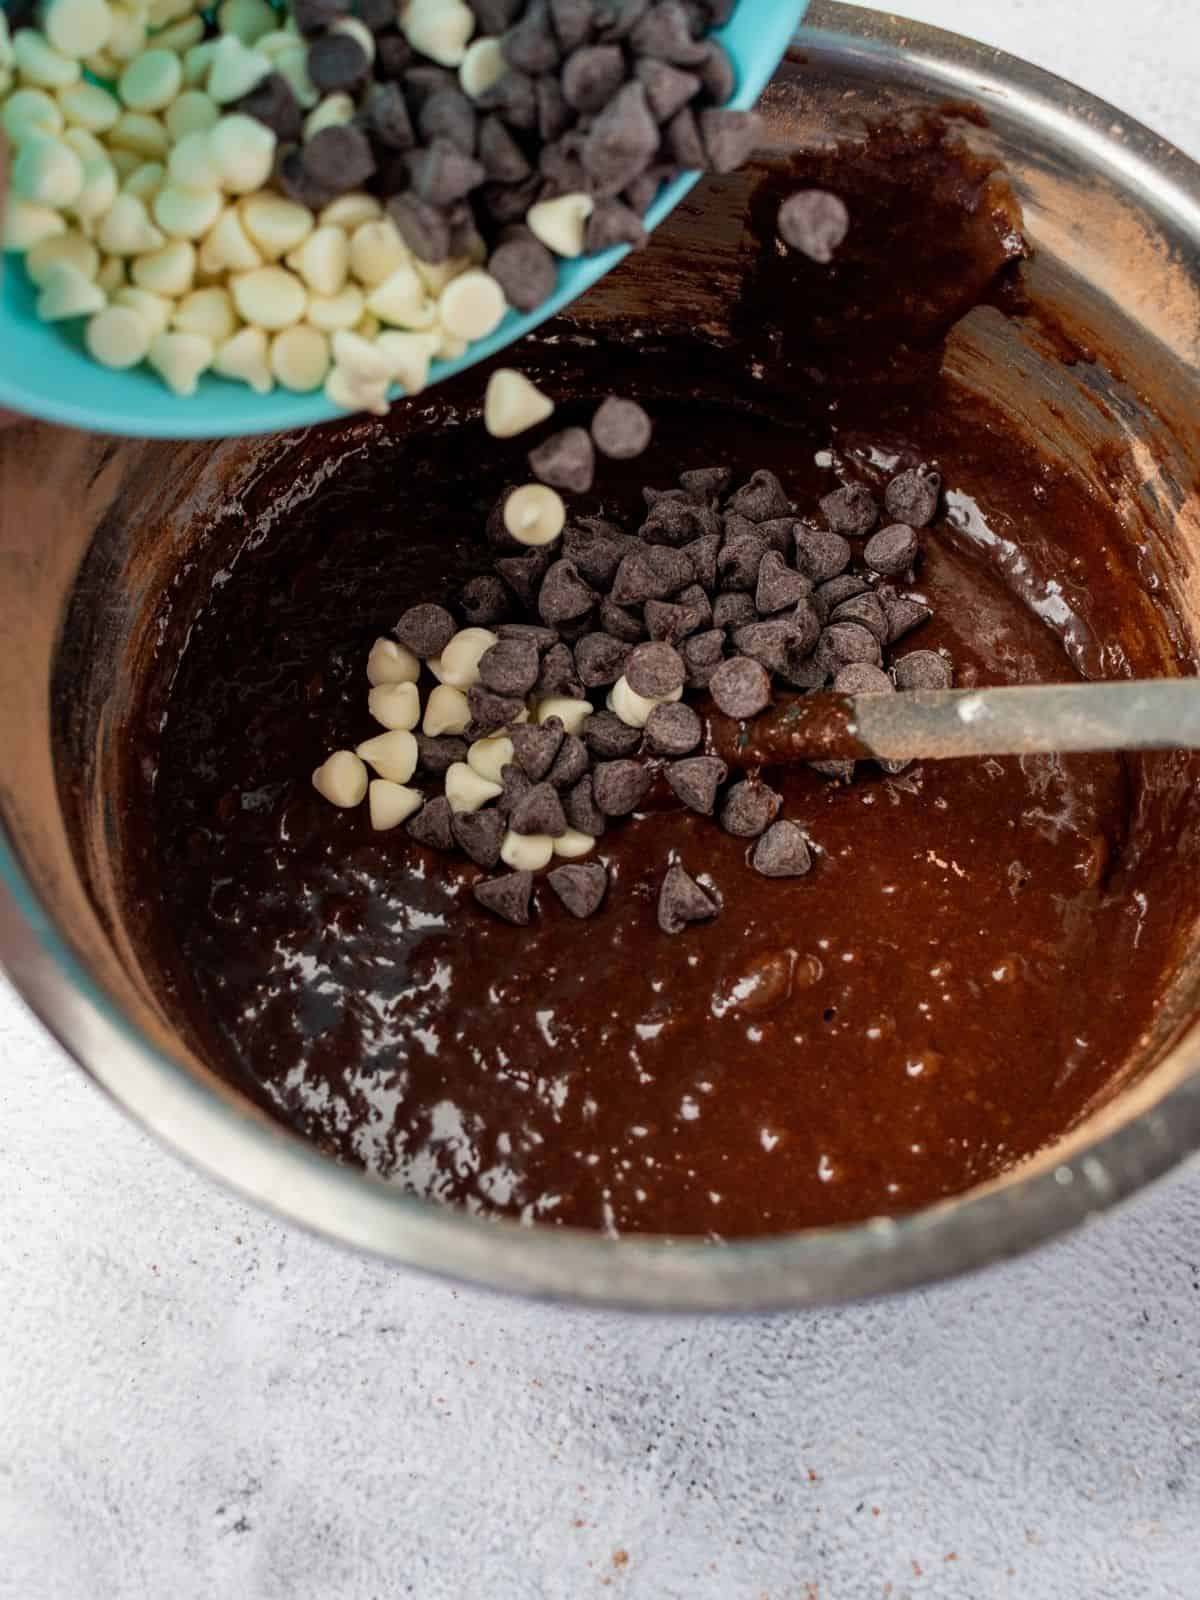 White and semi-sweet chocolate chips to brownie batter.